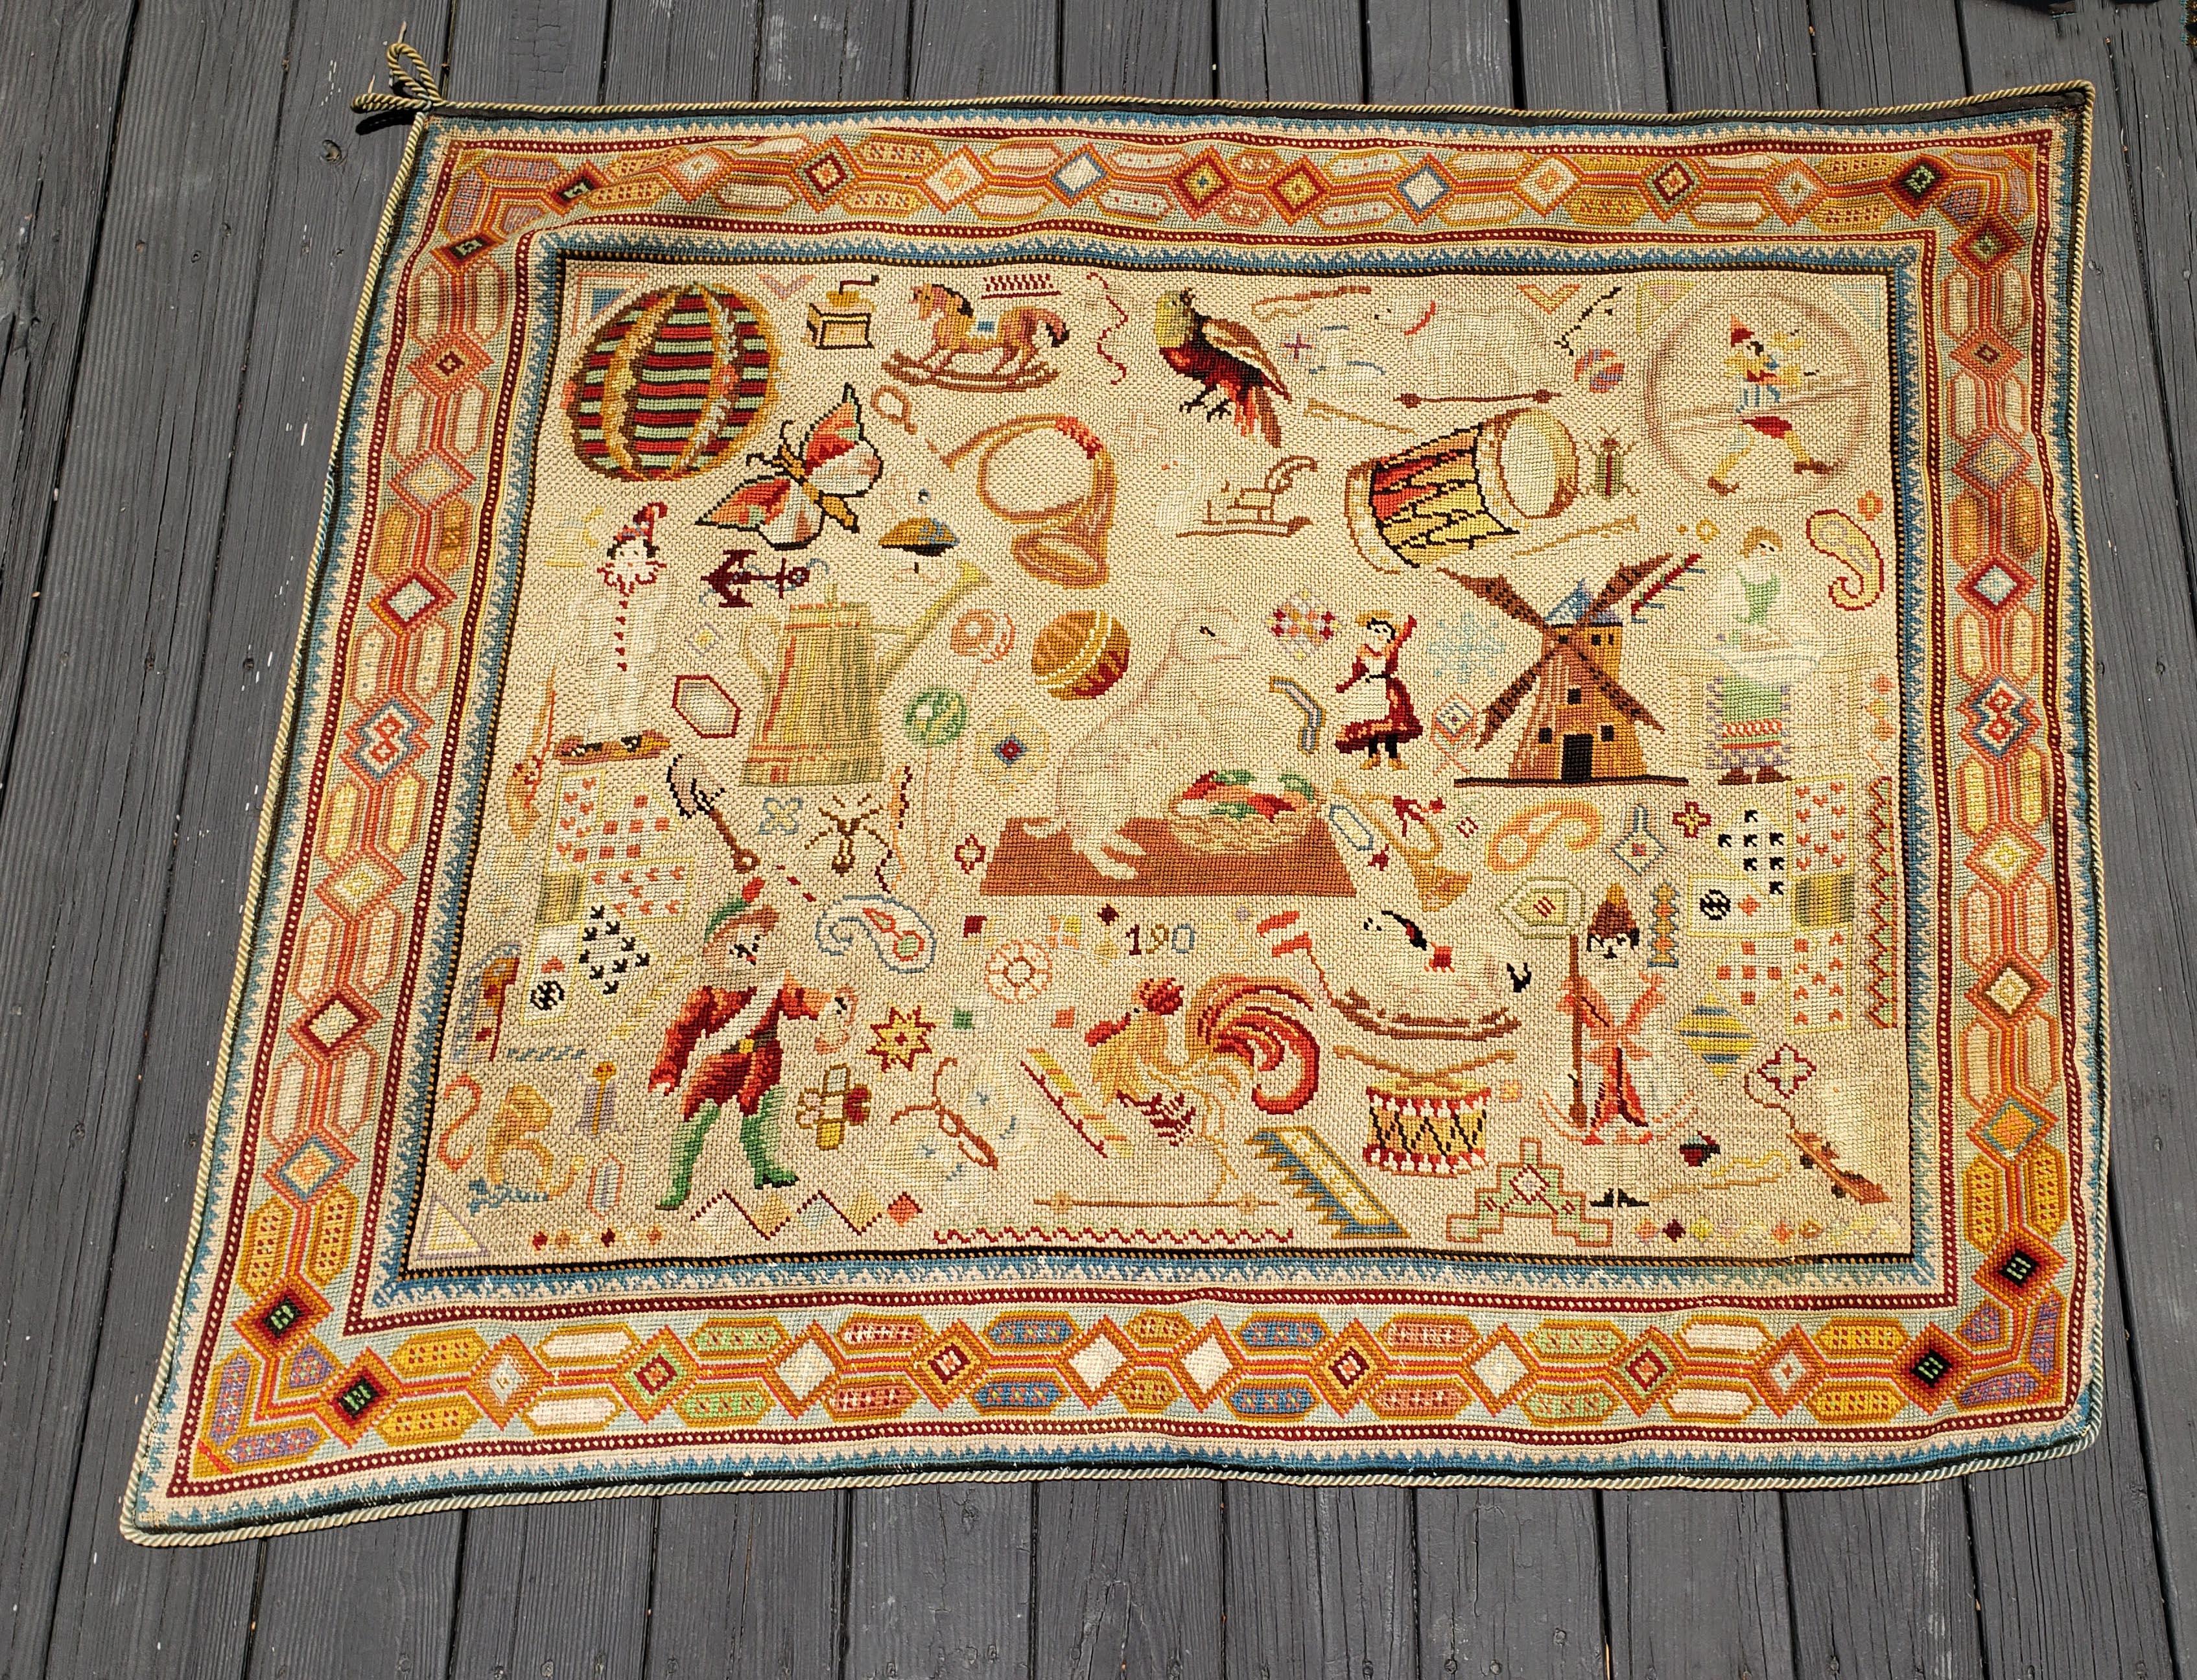 Children's Edwardian needlepoint wall hanging
Early 20th century

The rectangular needlepoint is decorated with different children's playthings.

Dimensions: 50 inches x 62 inches.
   